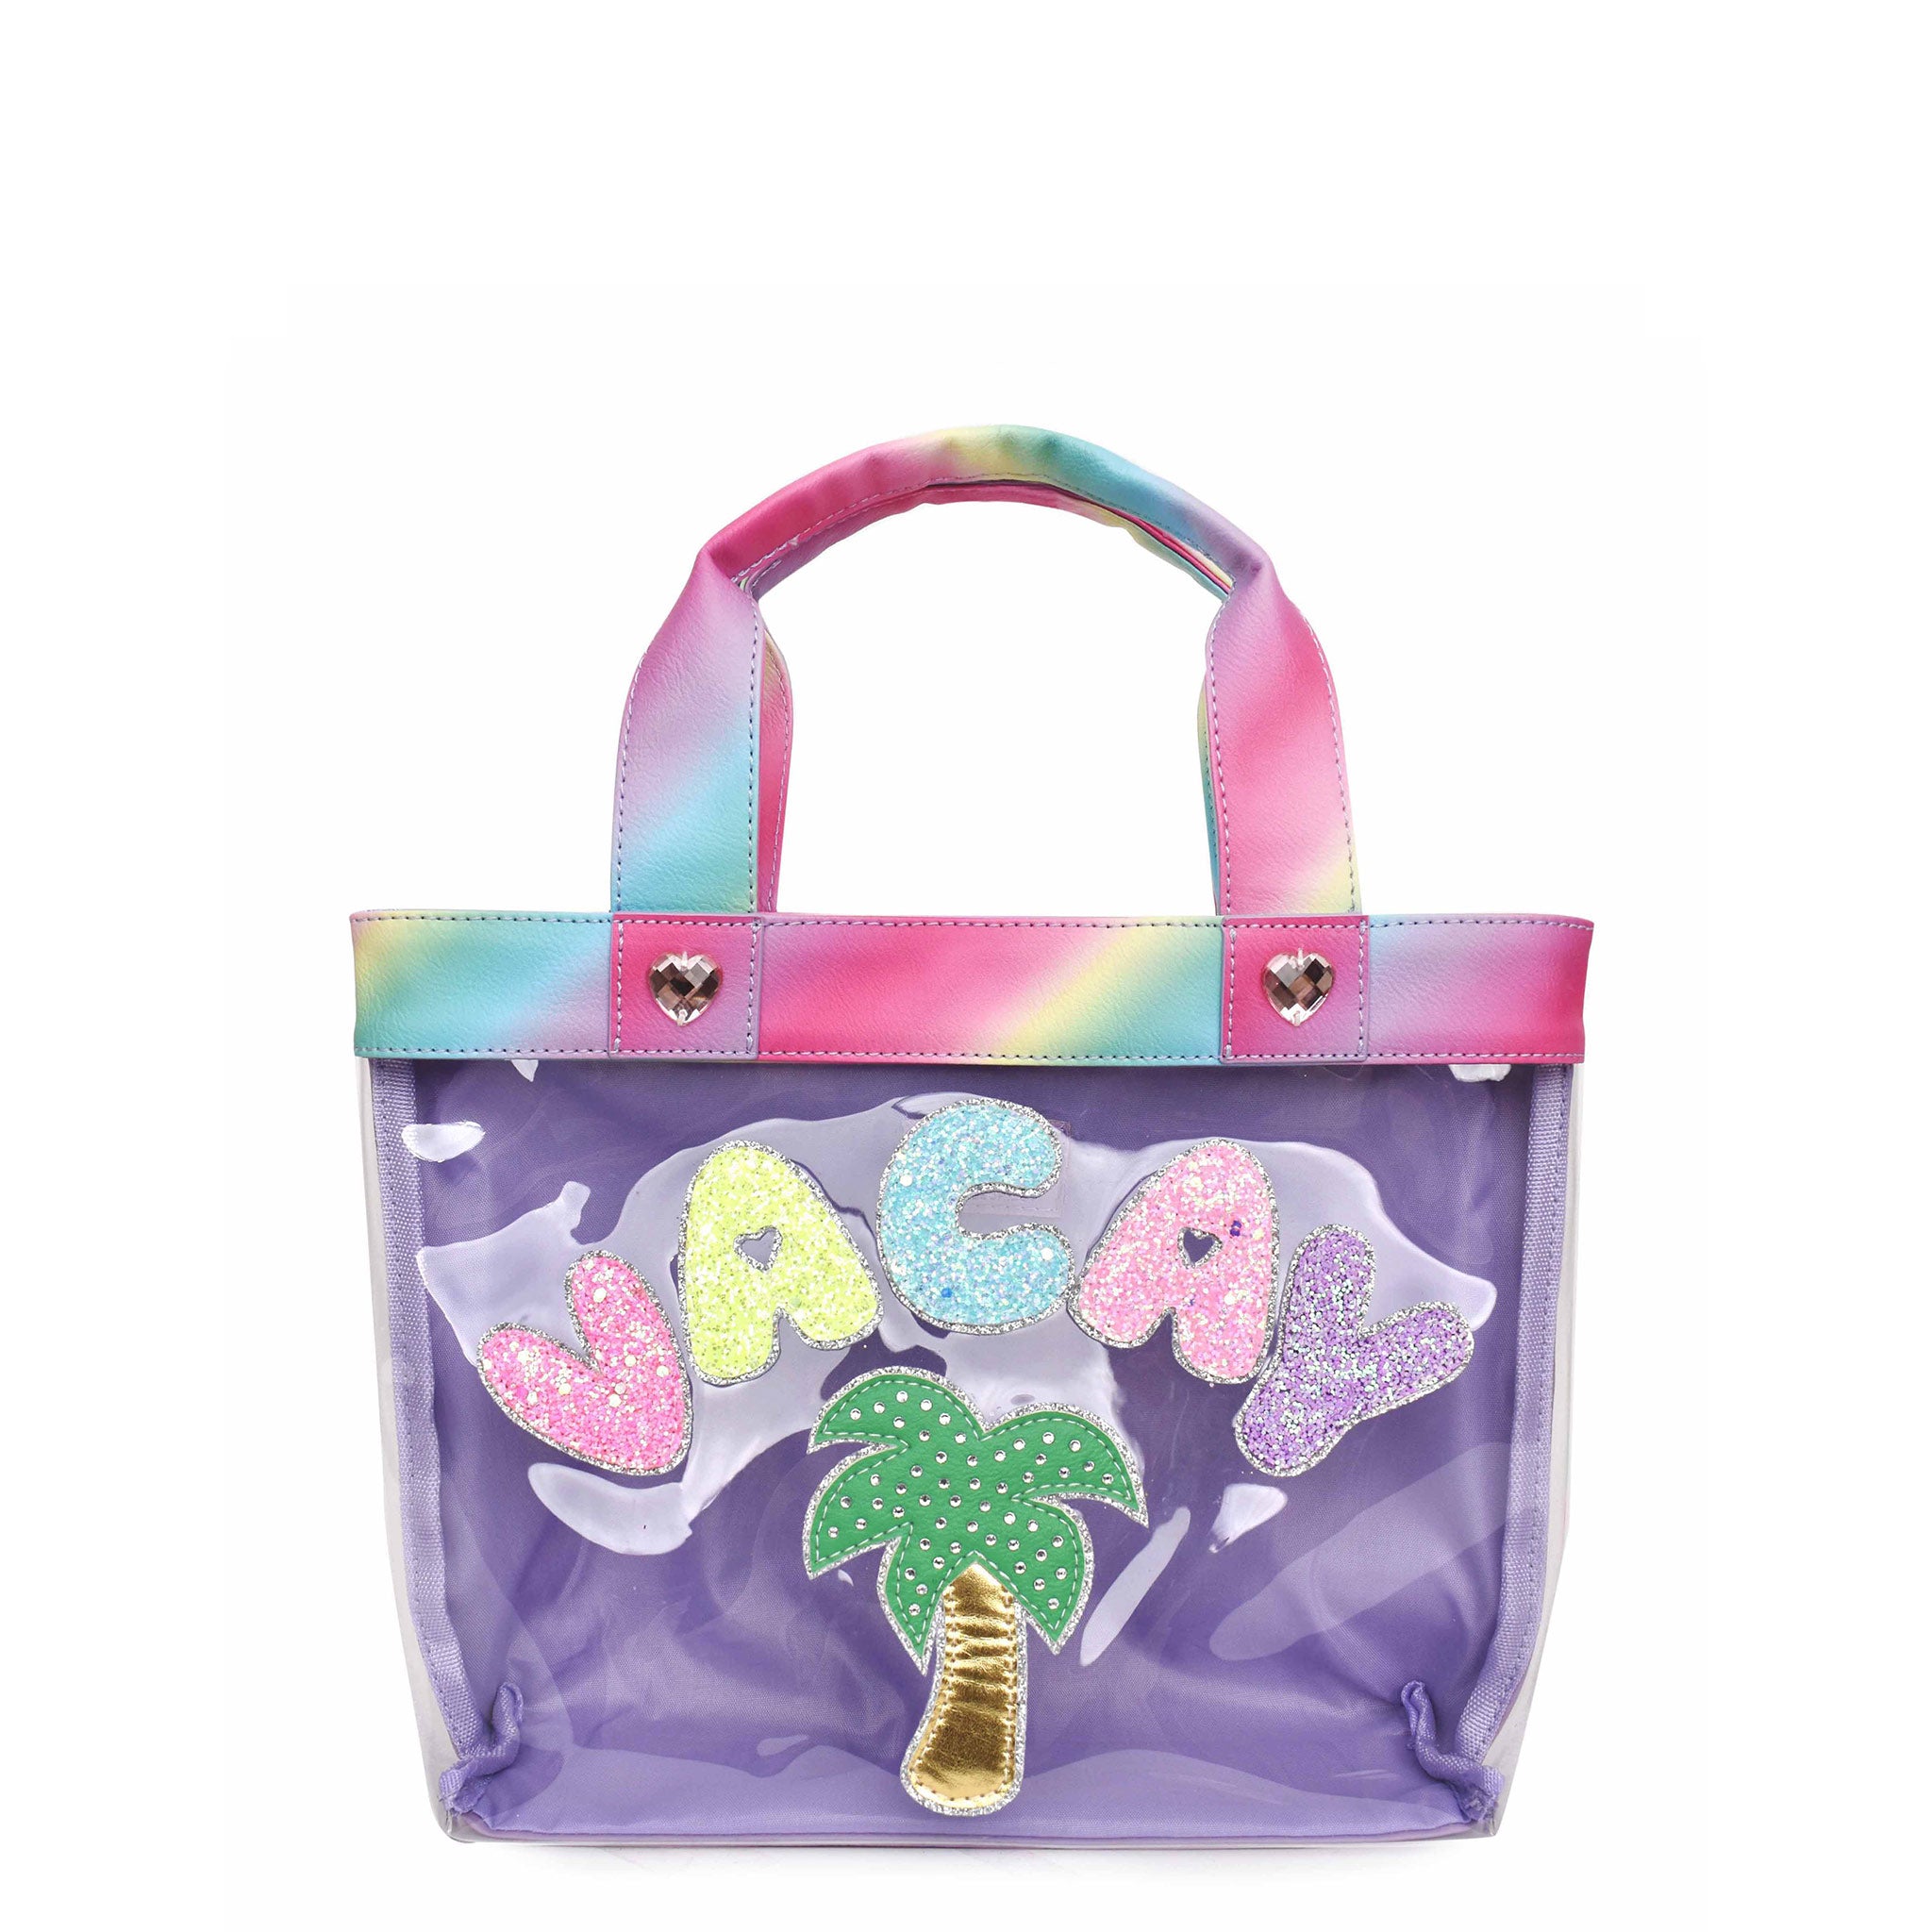 Front view of clear tote bag embellished with glitter bubble letters 'VACAY' and palm tree appliqués 